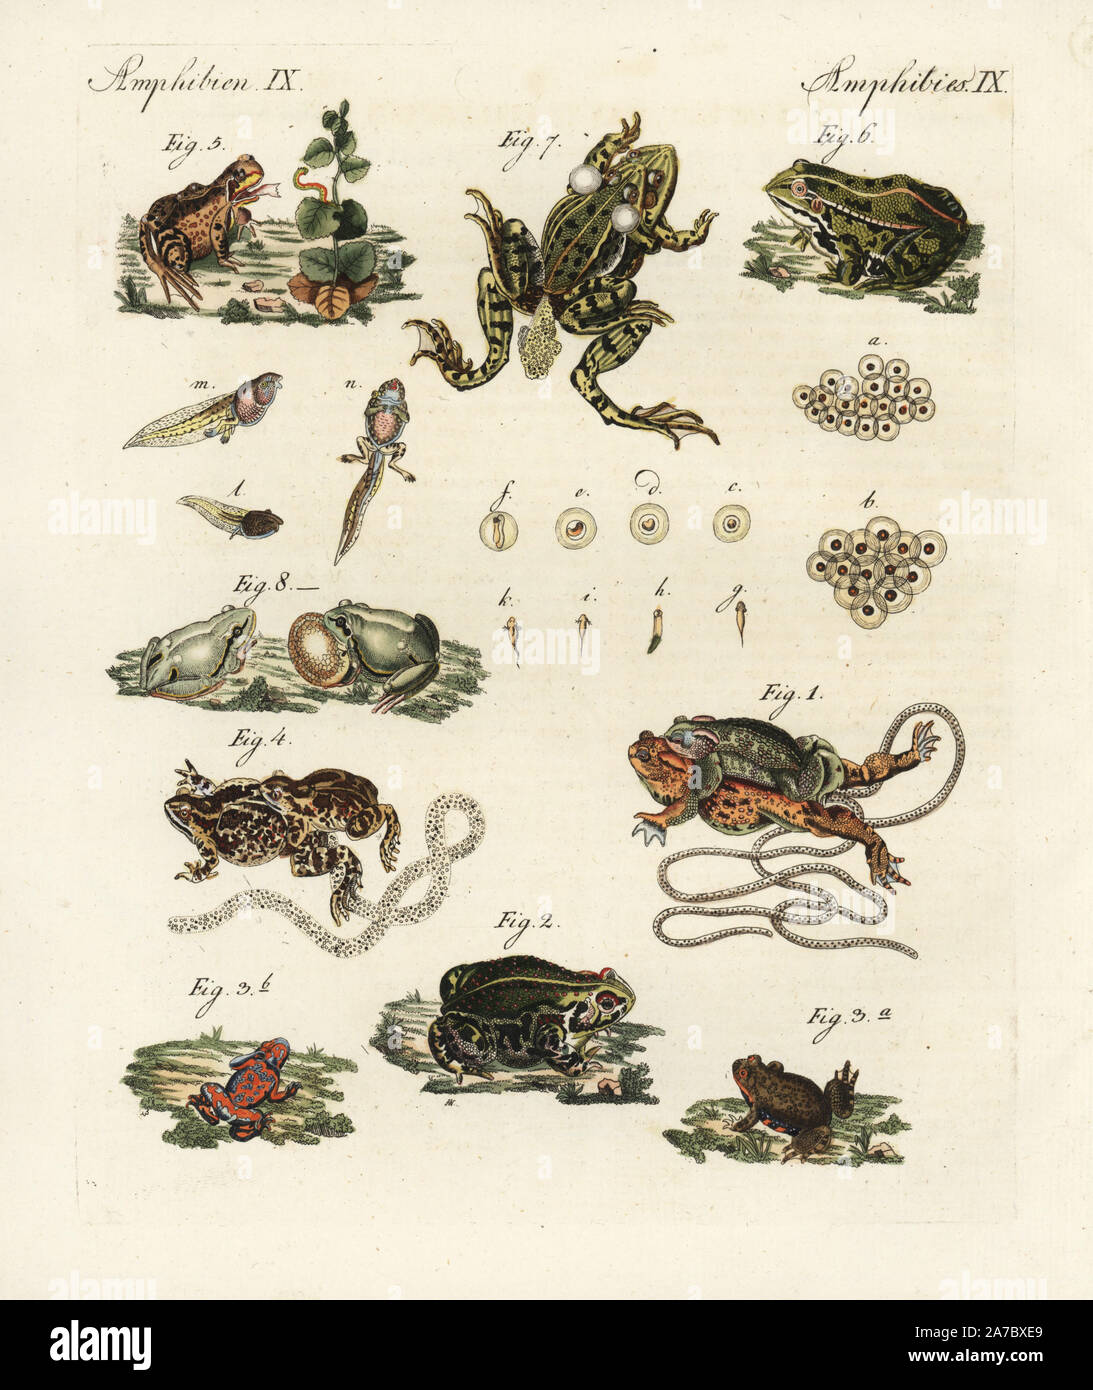 Common toad, Bufo bufo 1, natterjack toad, Bufo calamita 2, fire-bellied toad, Bombina bombina 3, lineated frog, Leptodactylus fuscus 4, common frog, Rana temporaria 5, edible frog, Pelophylax esculentus 6,7, tree frog, Hyla arborea 8. Handcoloured copperplate engraving from Bertuch's 'Bilderbuch fur Kinder' (Picture Book for Children), Weimar, 1798. Friedrich Johann Bertuch (1747-1822) was a German publisher and man of arts most famous for his 12-volume encyclopedia for children illustrated with 1,200 engraved plates on natural history, science, costume, mythology, etc., published from 1790-1 Stock Photo